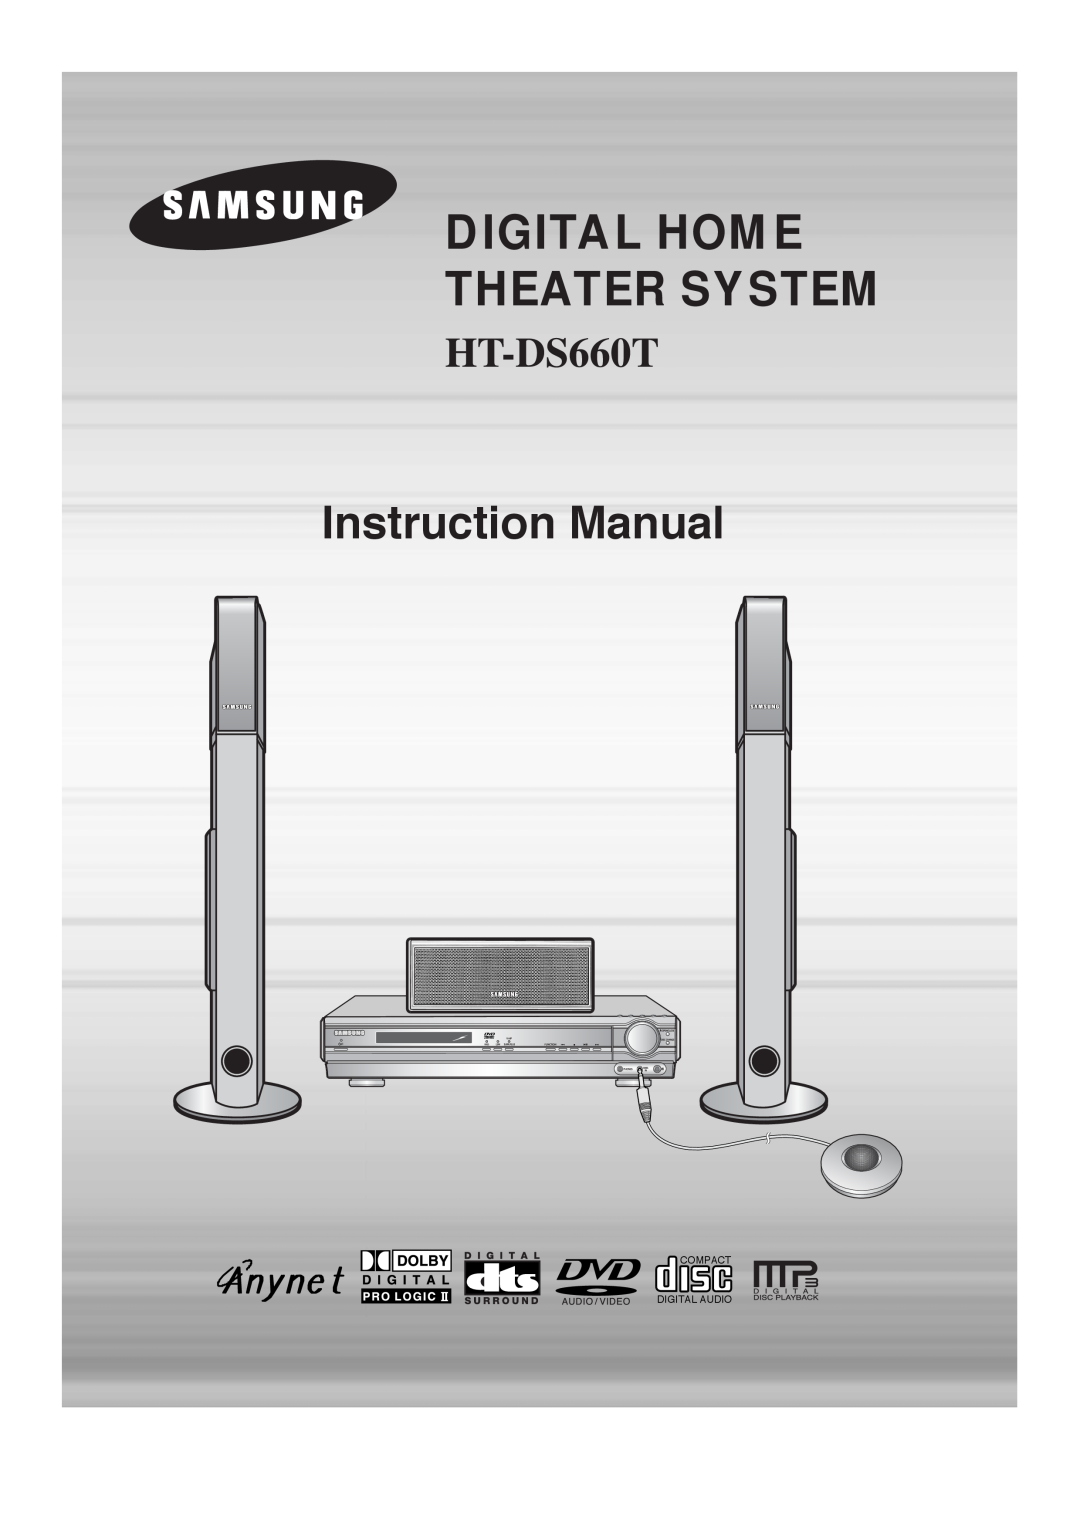 Samsung 20051111103302296 instruction manual Digital Home Theater System, Instruction Manual, HT-DS660T 